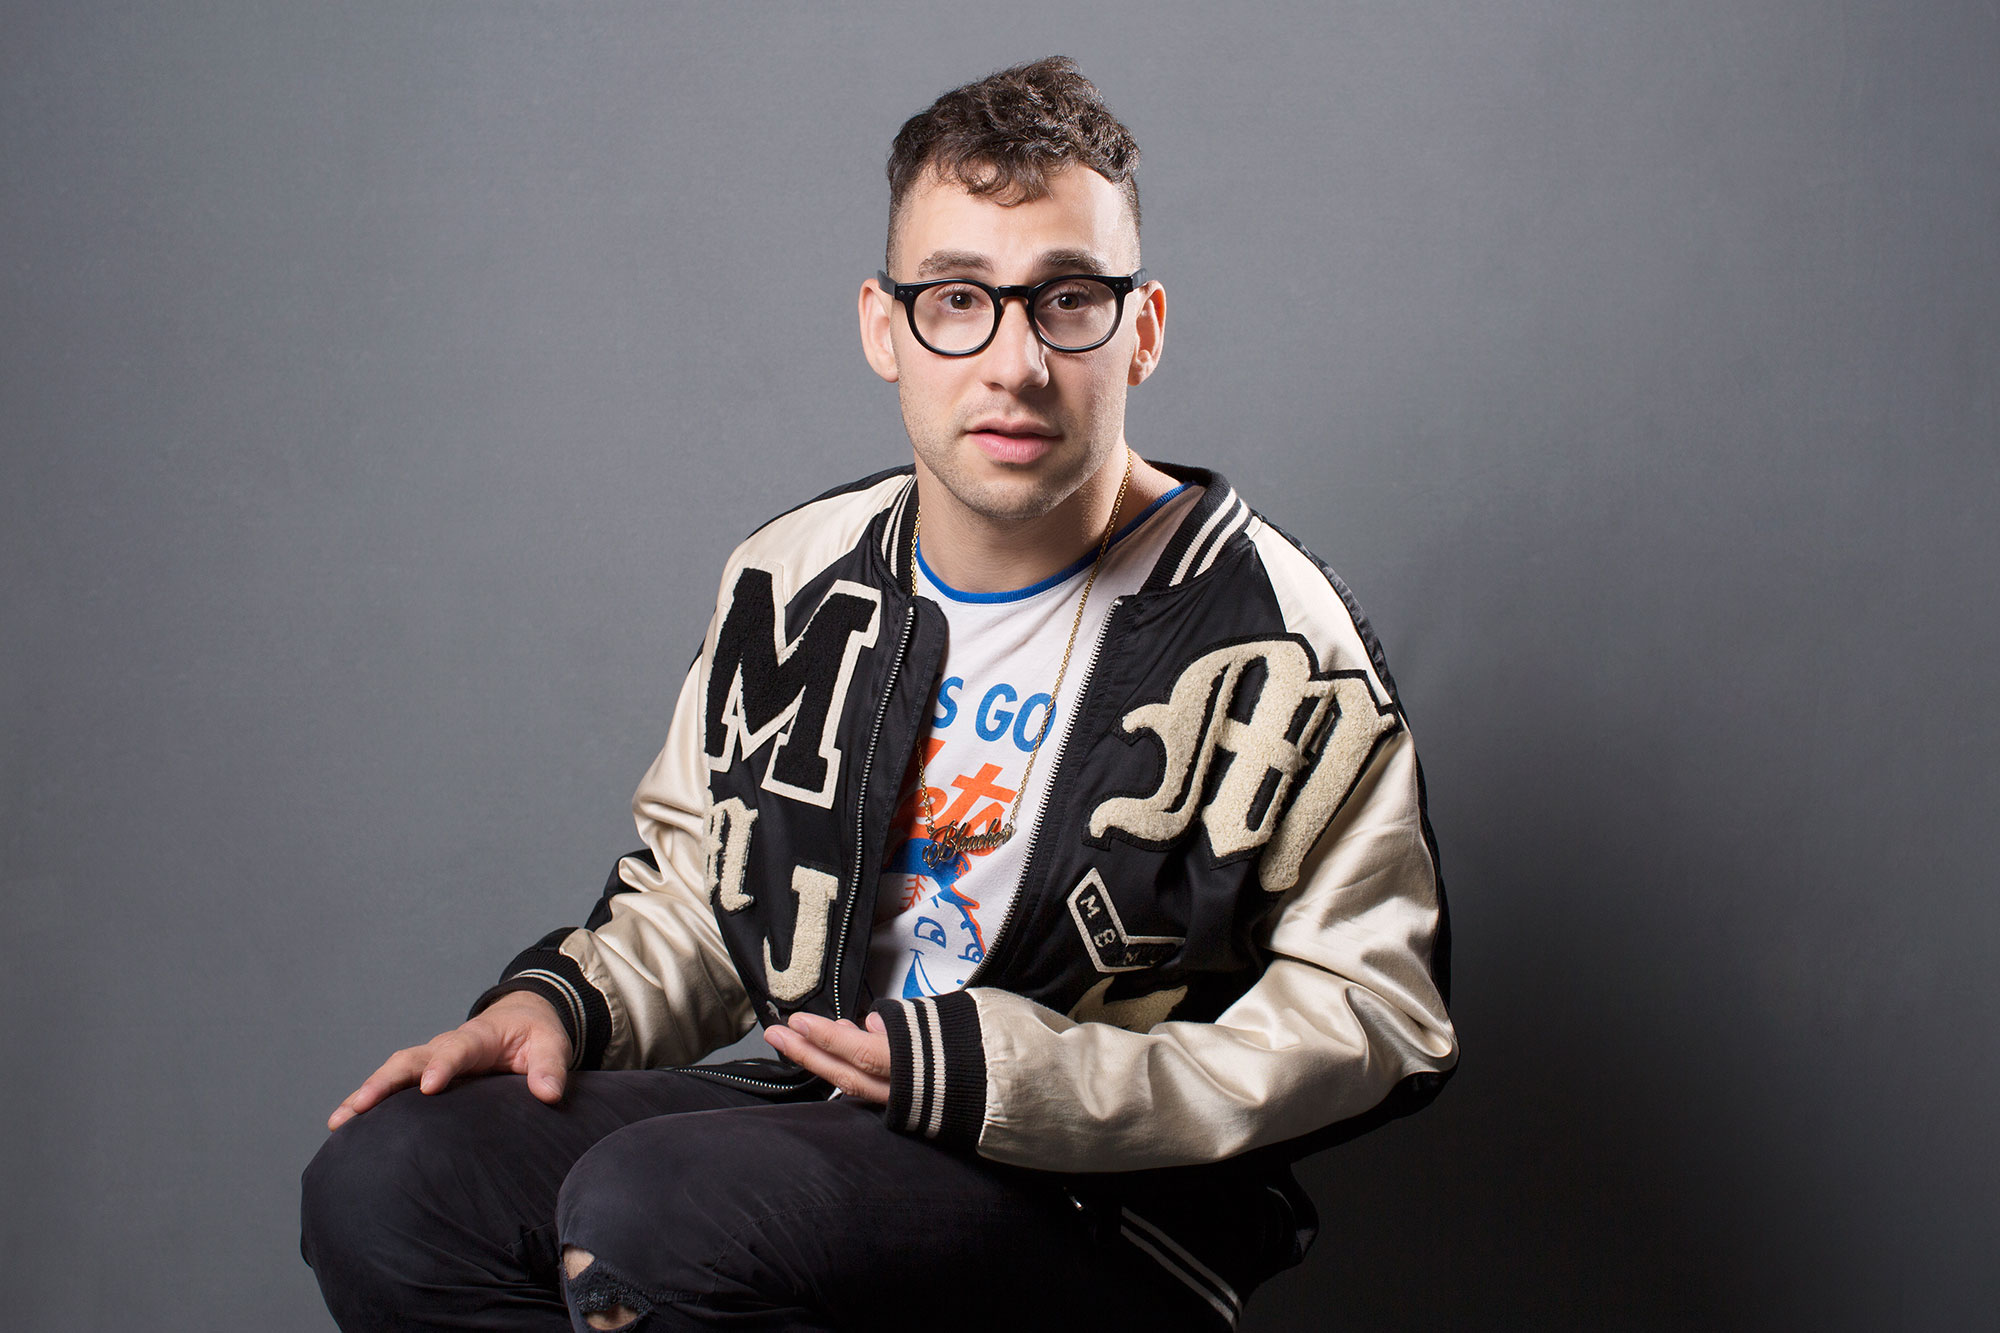 Sony/ATV extends worldwide deal with hit producer Jack Antonoff, successful redefiner of female pop